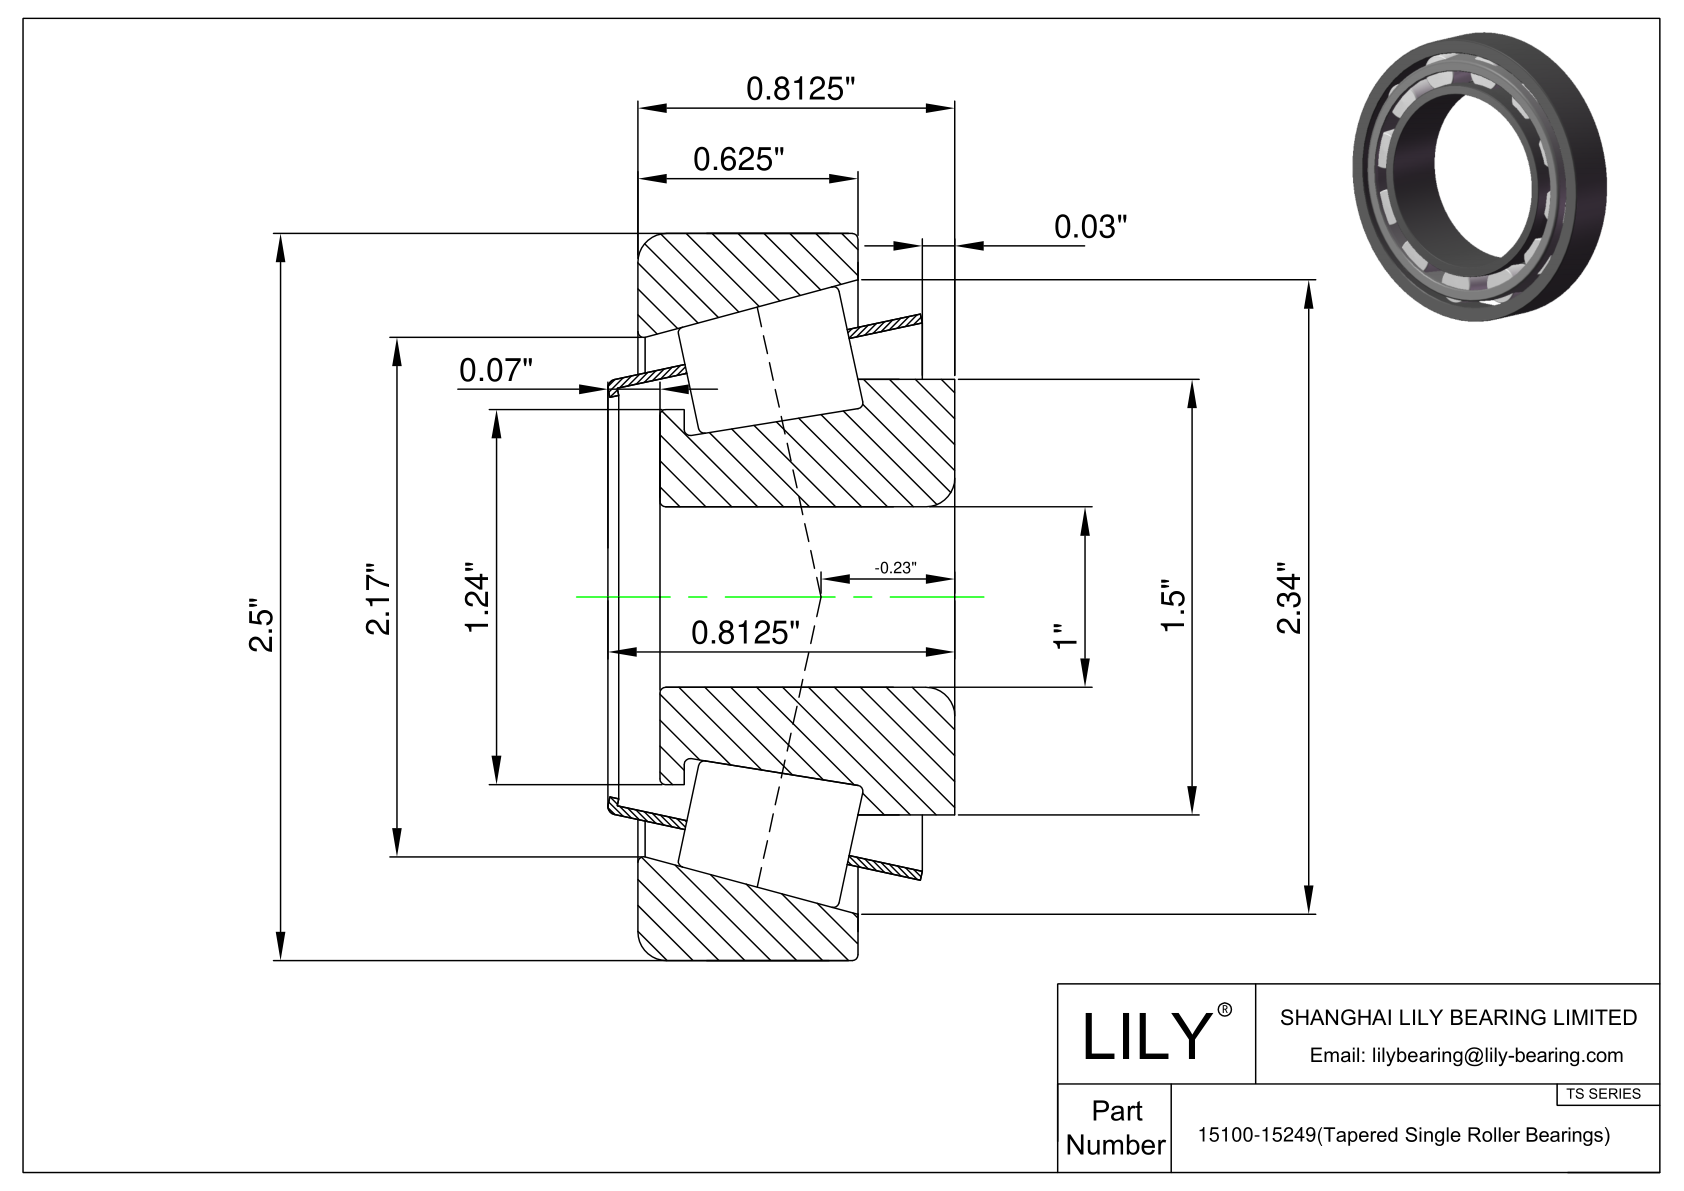 15100-15249 TS (Tapered Single Roller Bearings) (Imperial) cad drawing